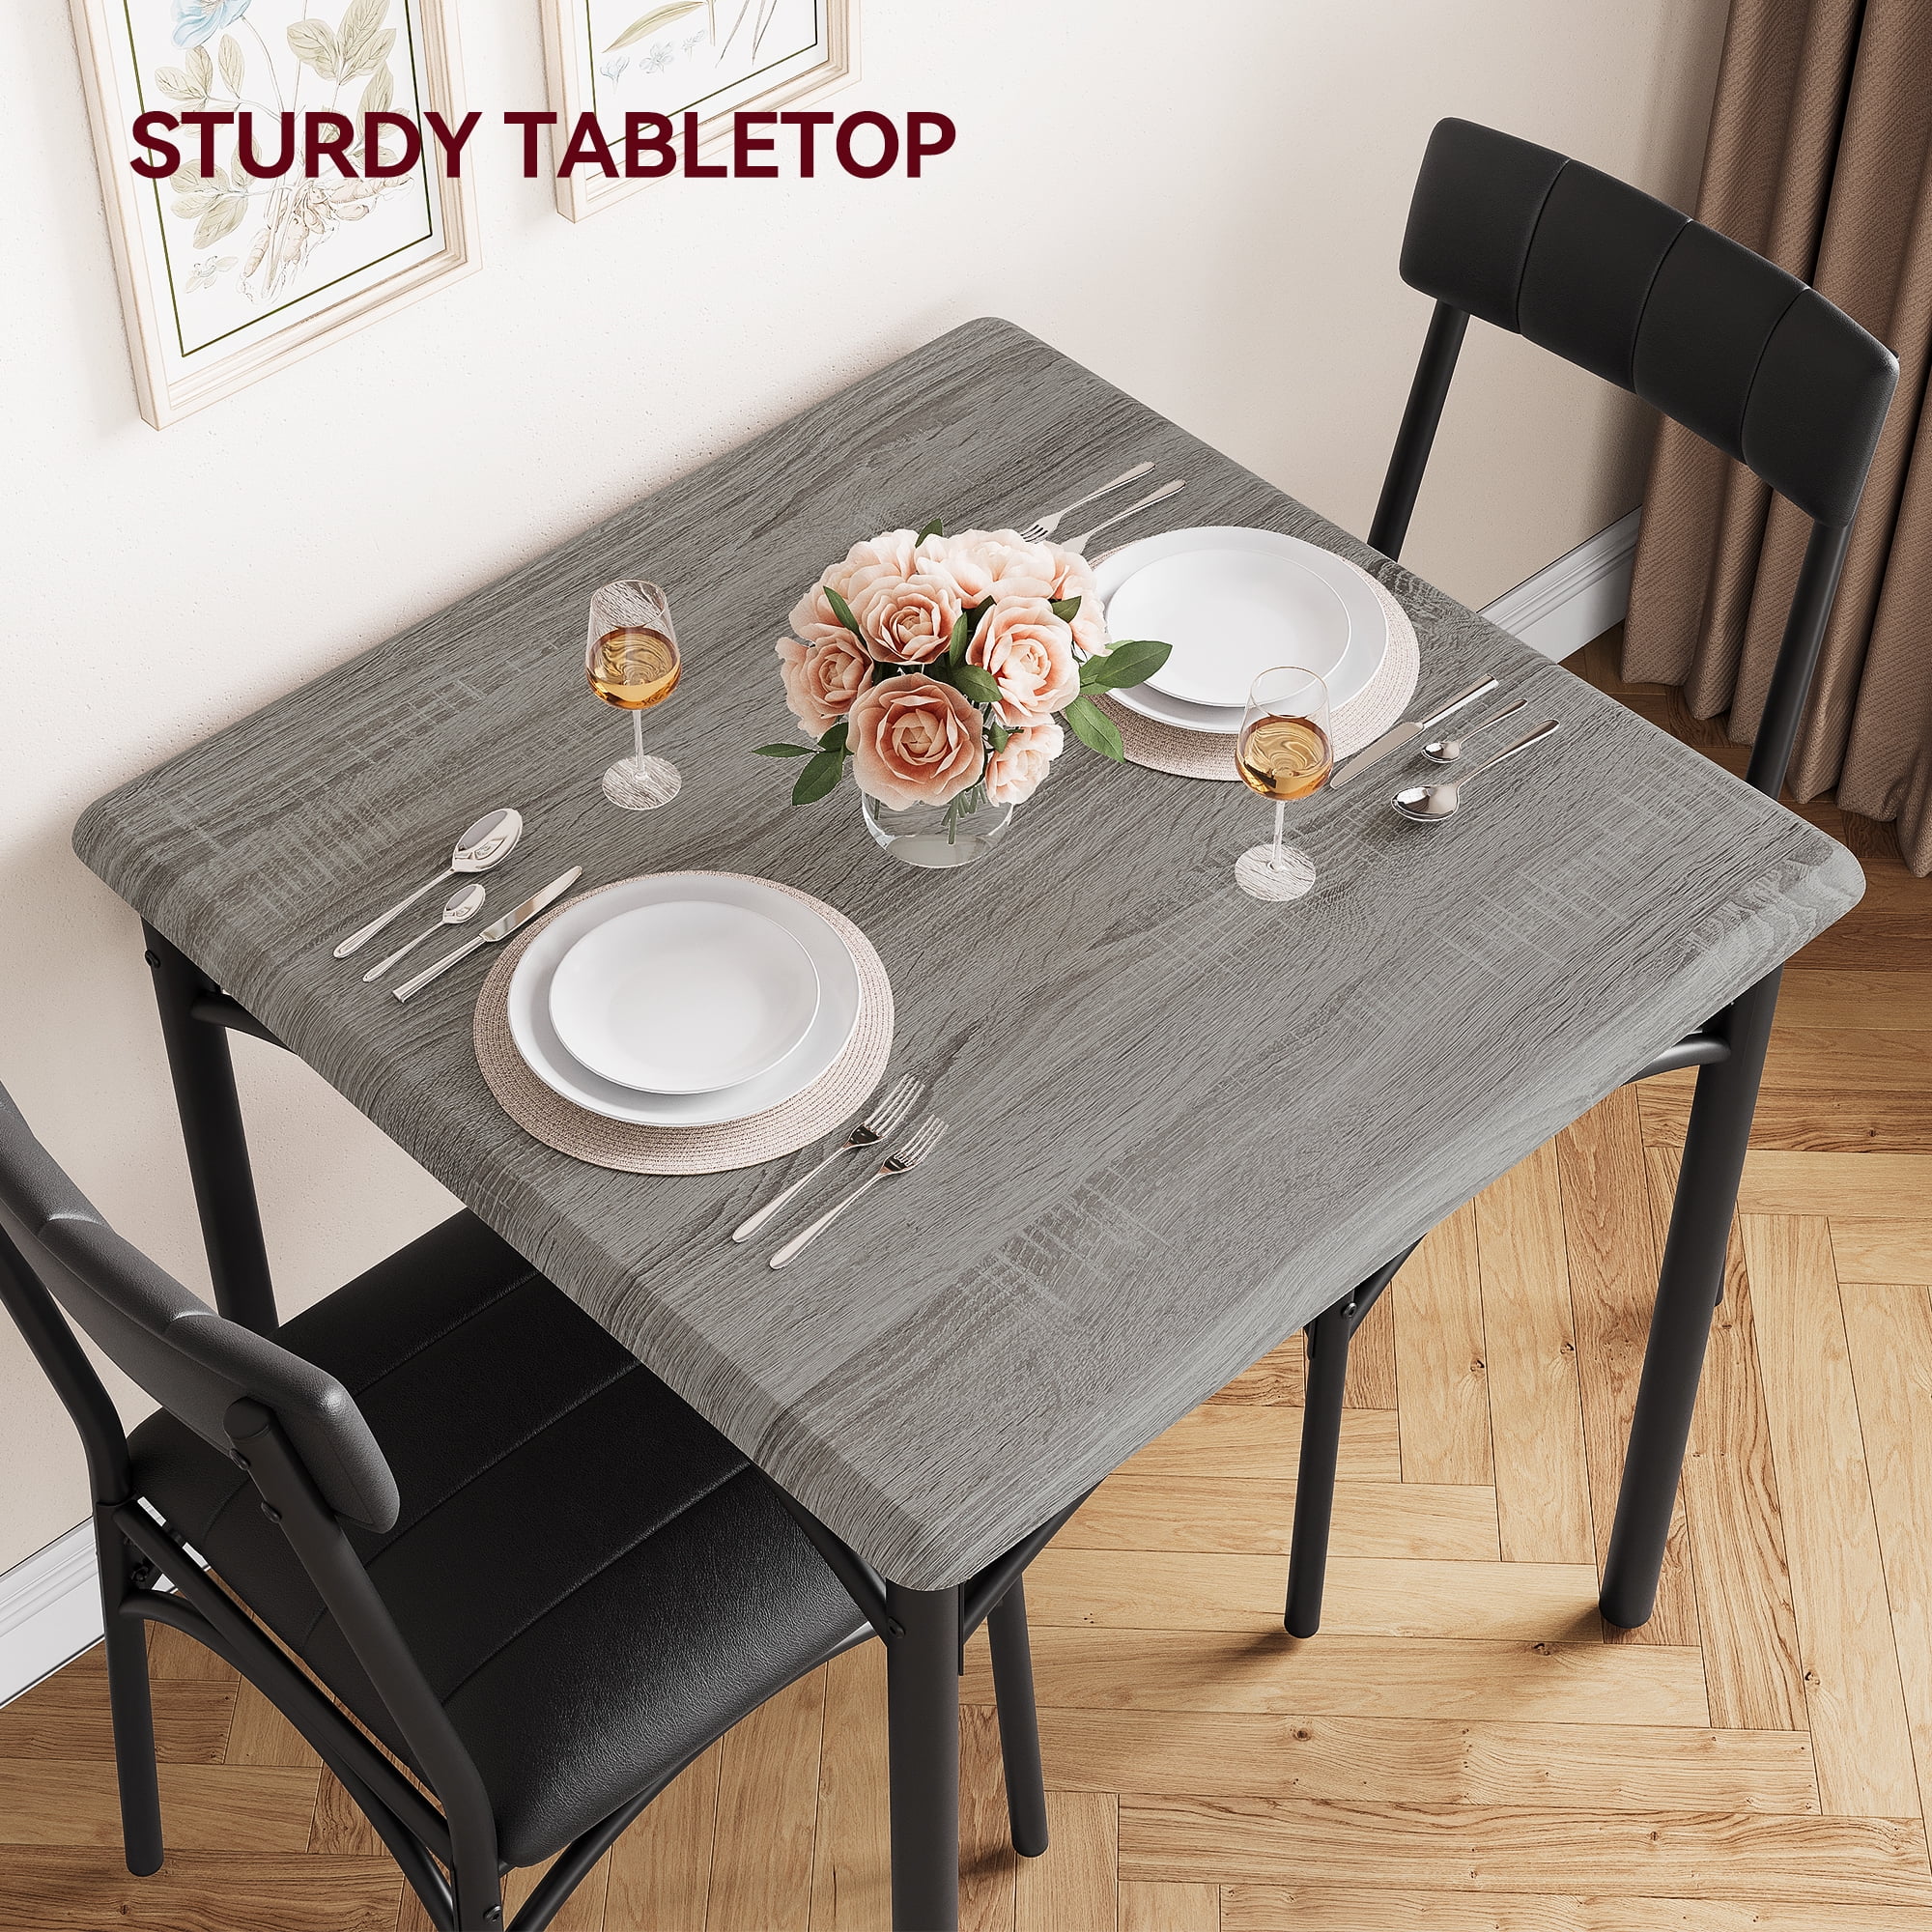 Oyang 3 Piece Dining Table Set, Kitchen Table and Chairs for 2 